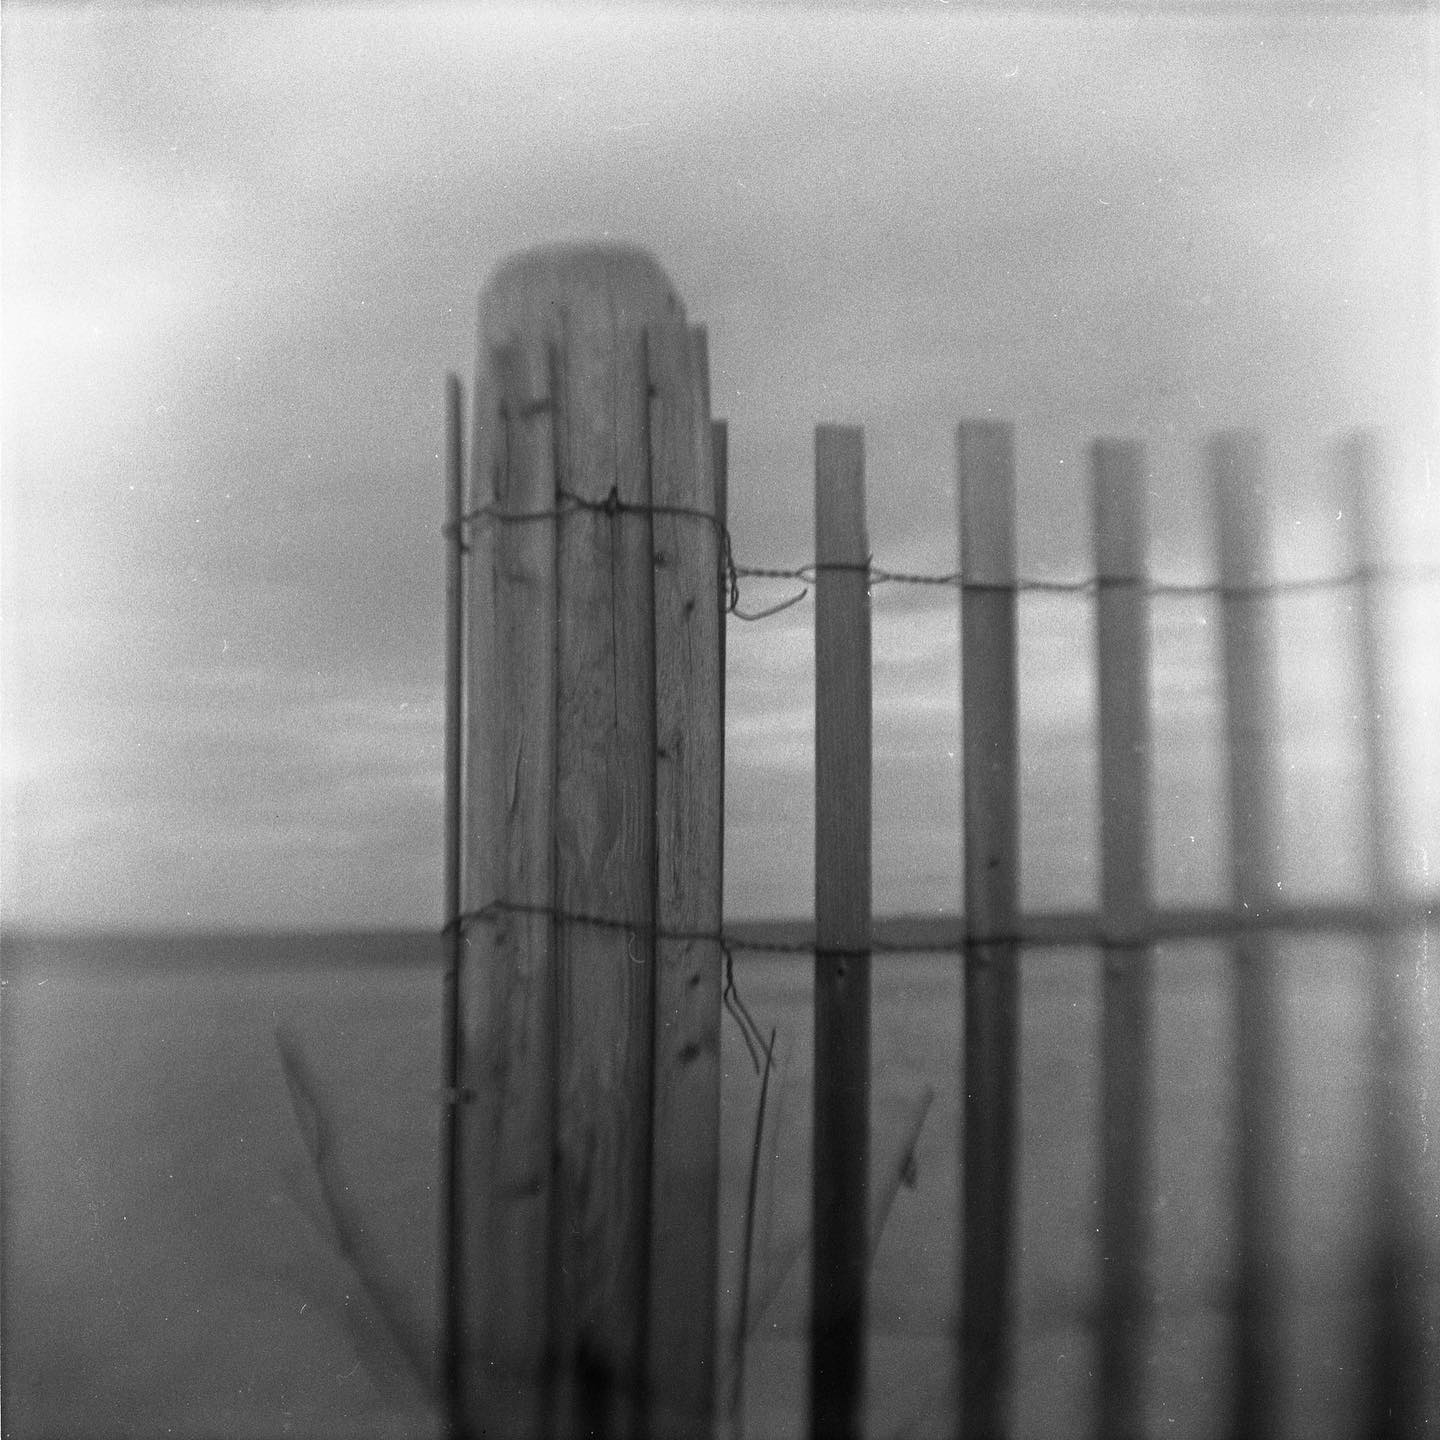 More box camera shots for @allthroughalens.podcast  These were with one of my Kodak Brownie Hawkeye cameras. One trick the podcast didnât mention for these cameras is that itâs really easy to flip the lens and get this funky Petzval-like blur. These were shot on 2009; the third is a cyanotype that I made in 2017 from one of the negatives from 2009. These remain some of my favorite shots Iâve ever taken. #film #allthroughalenspodcast #filmphotography #staybrokeshootfilm #boxcamera #browniehawkeye